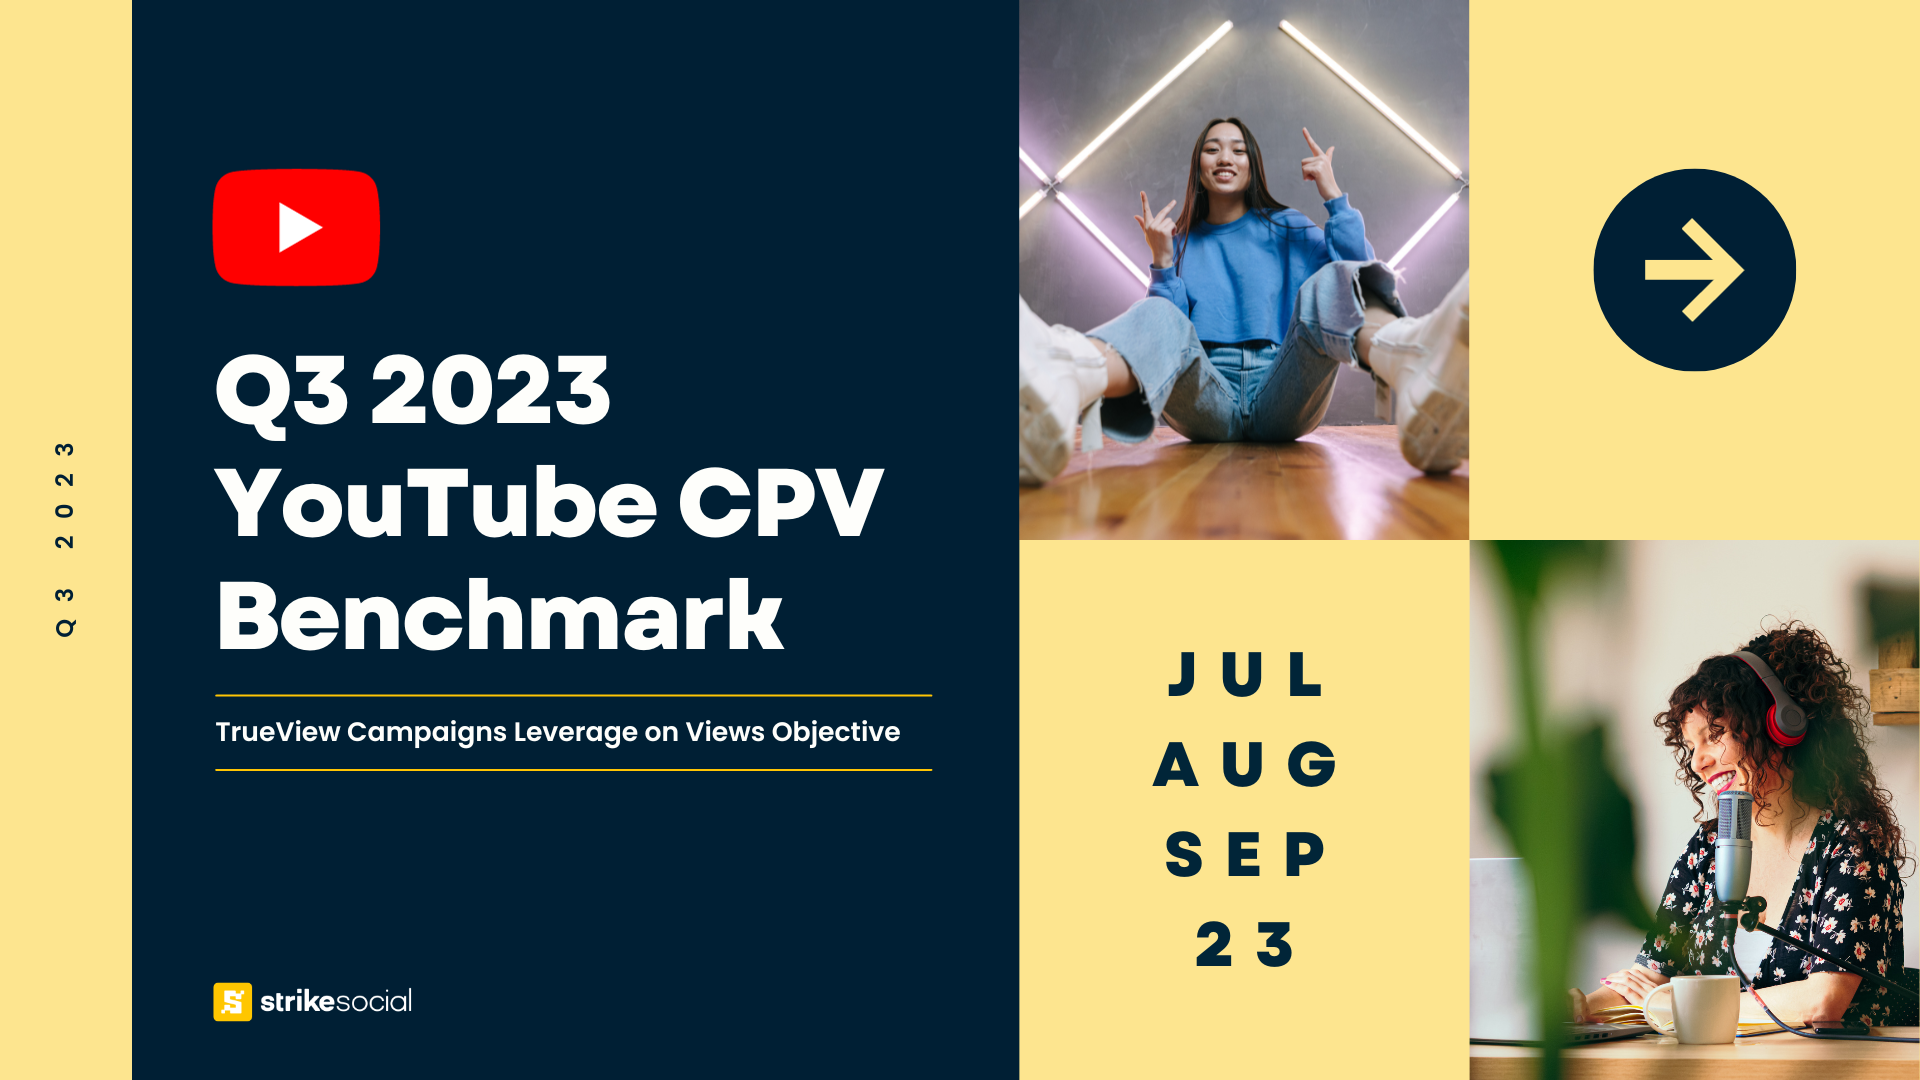 Strike Social - Q3 2023 YouTube CPV Benchmark - TrueView Campaigns Leverage on Views Objective